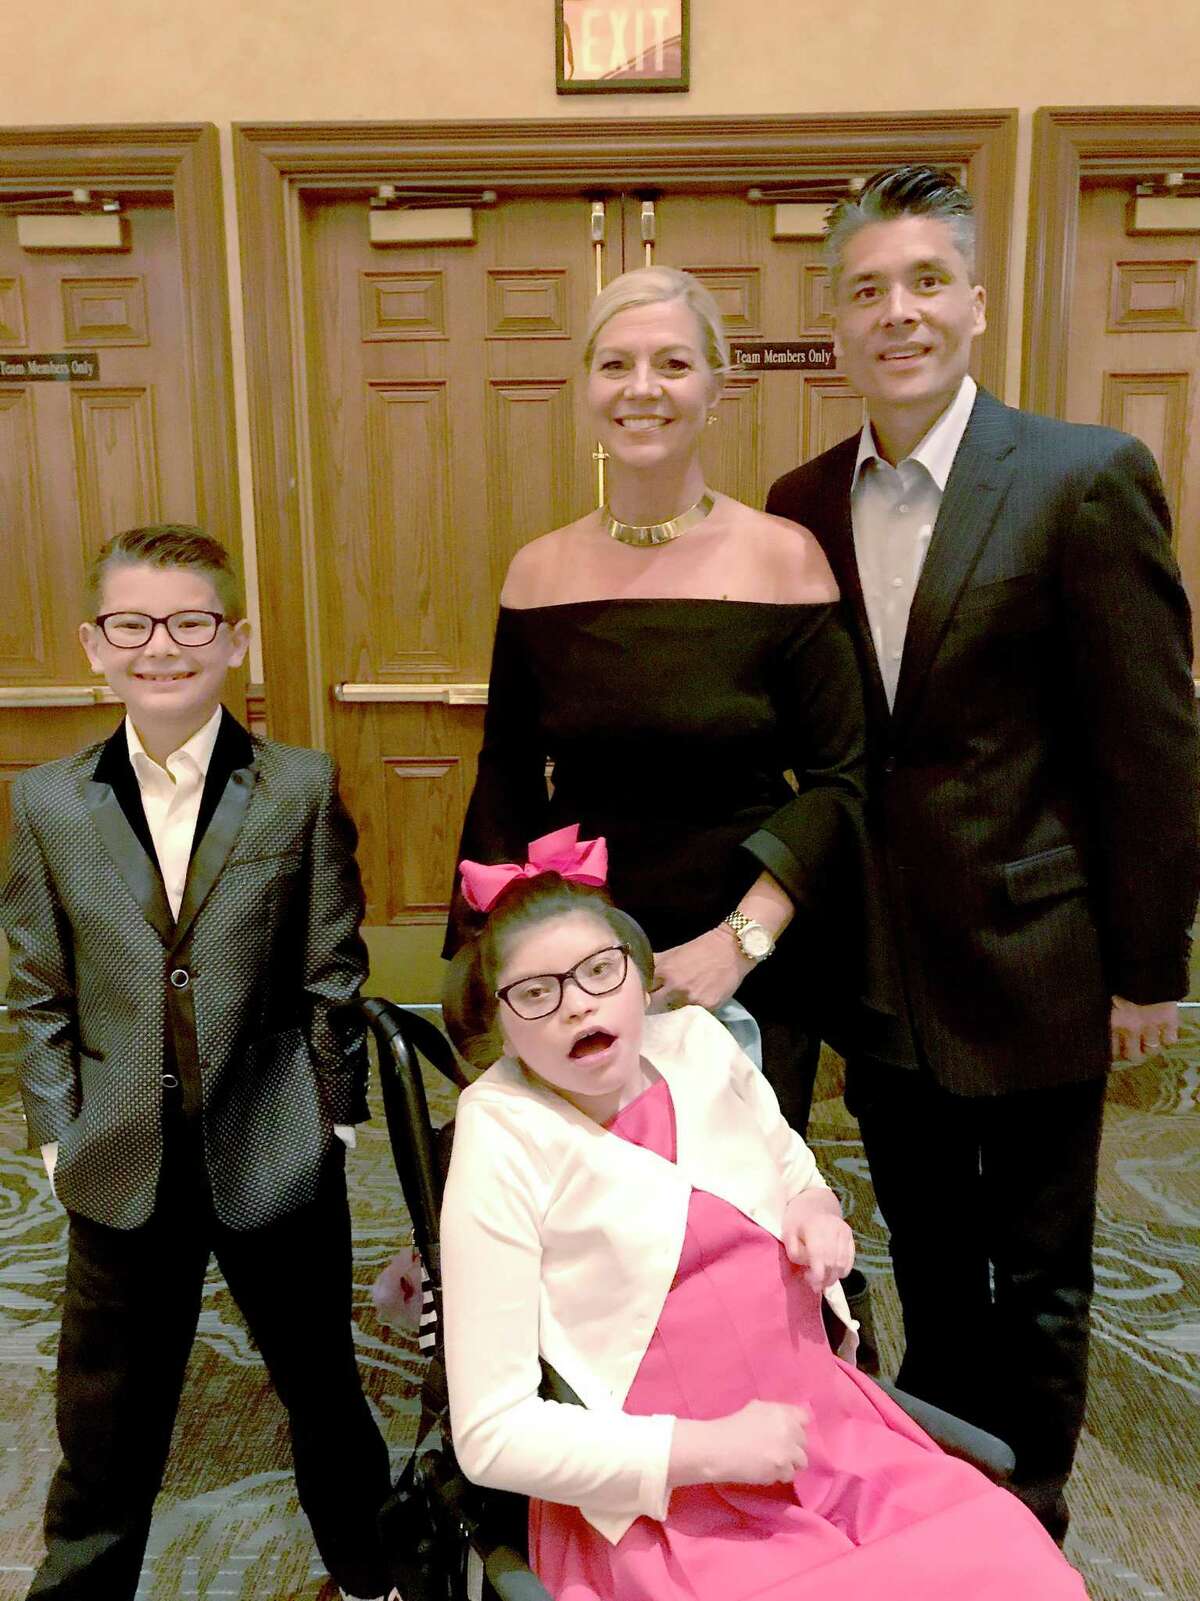 Mike Peck (right) poses for a photo with his wife Terri, son Gavin (left), and daughter Madi (front).